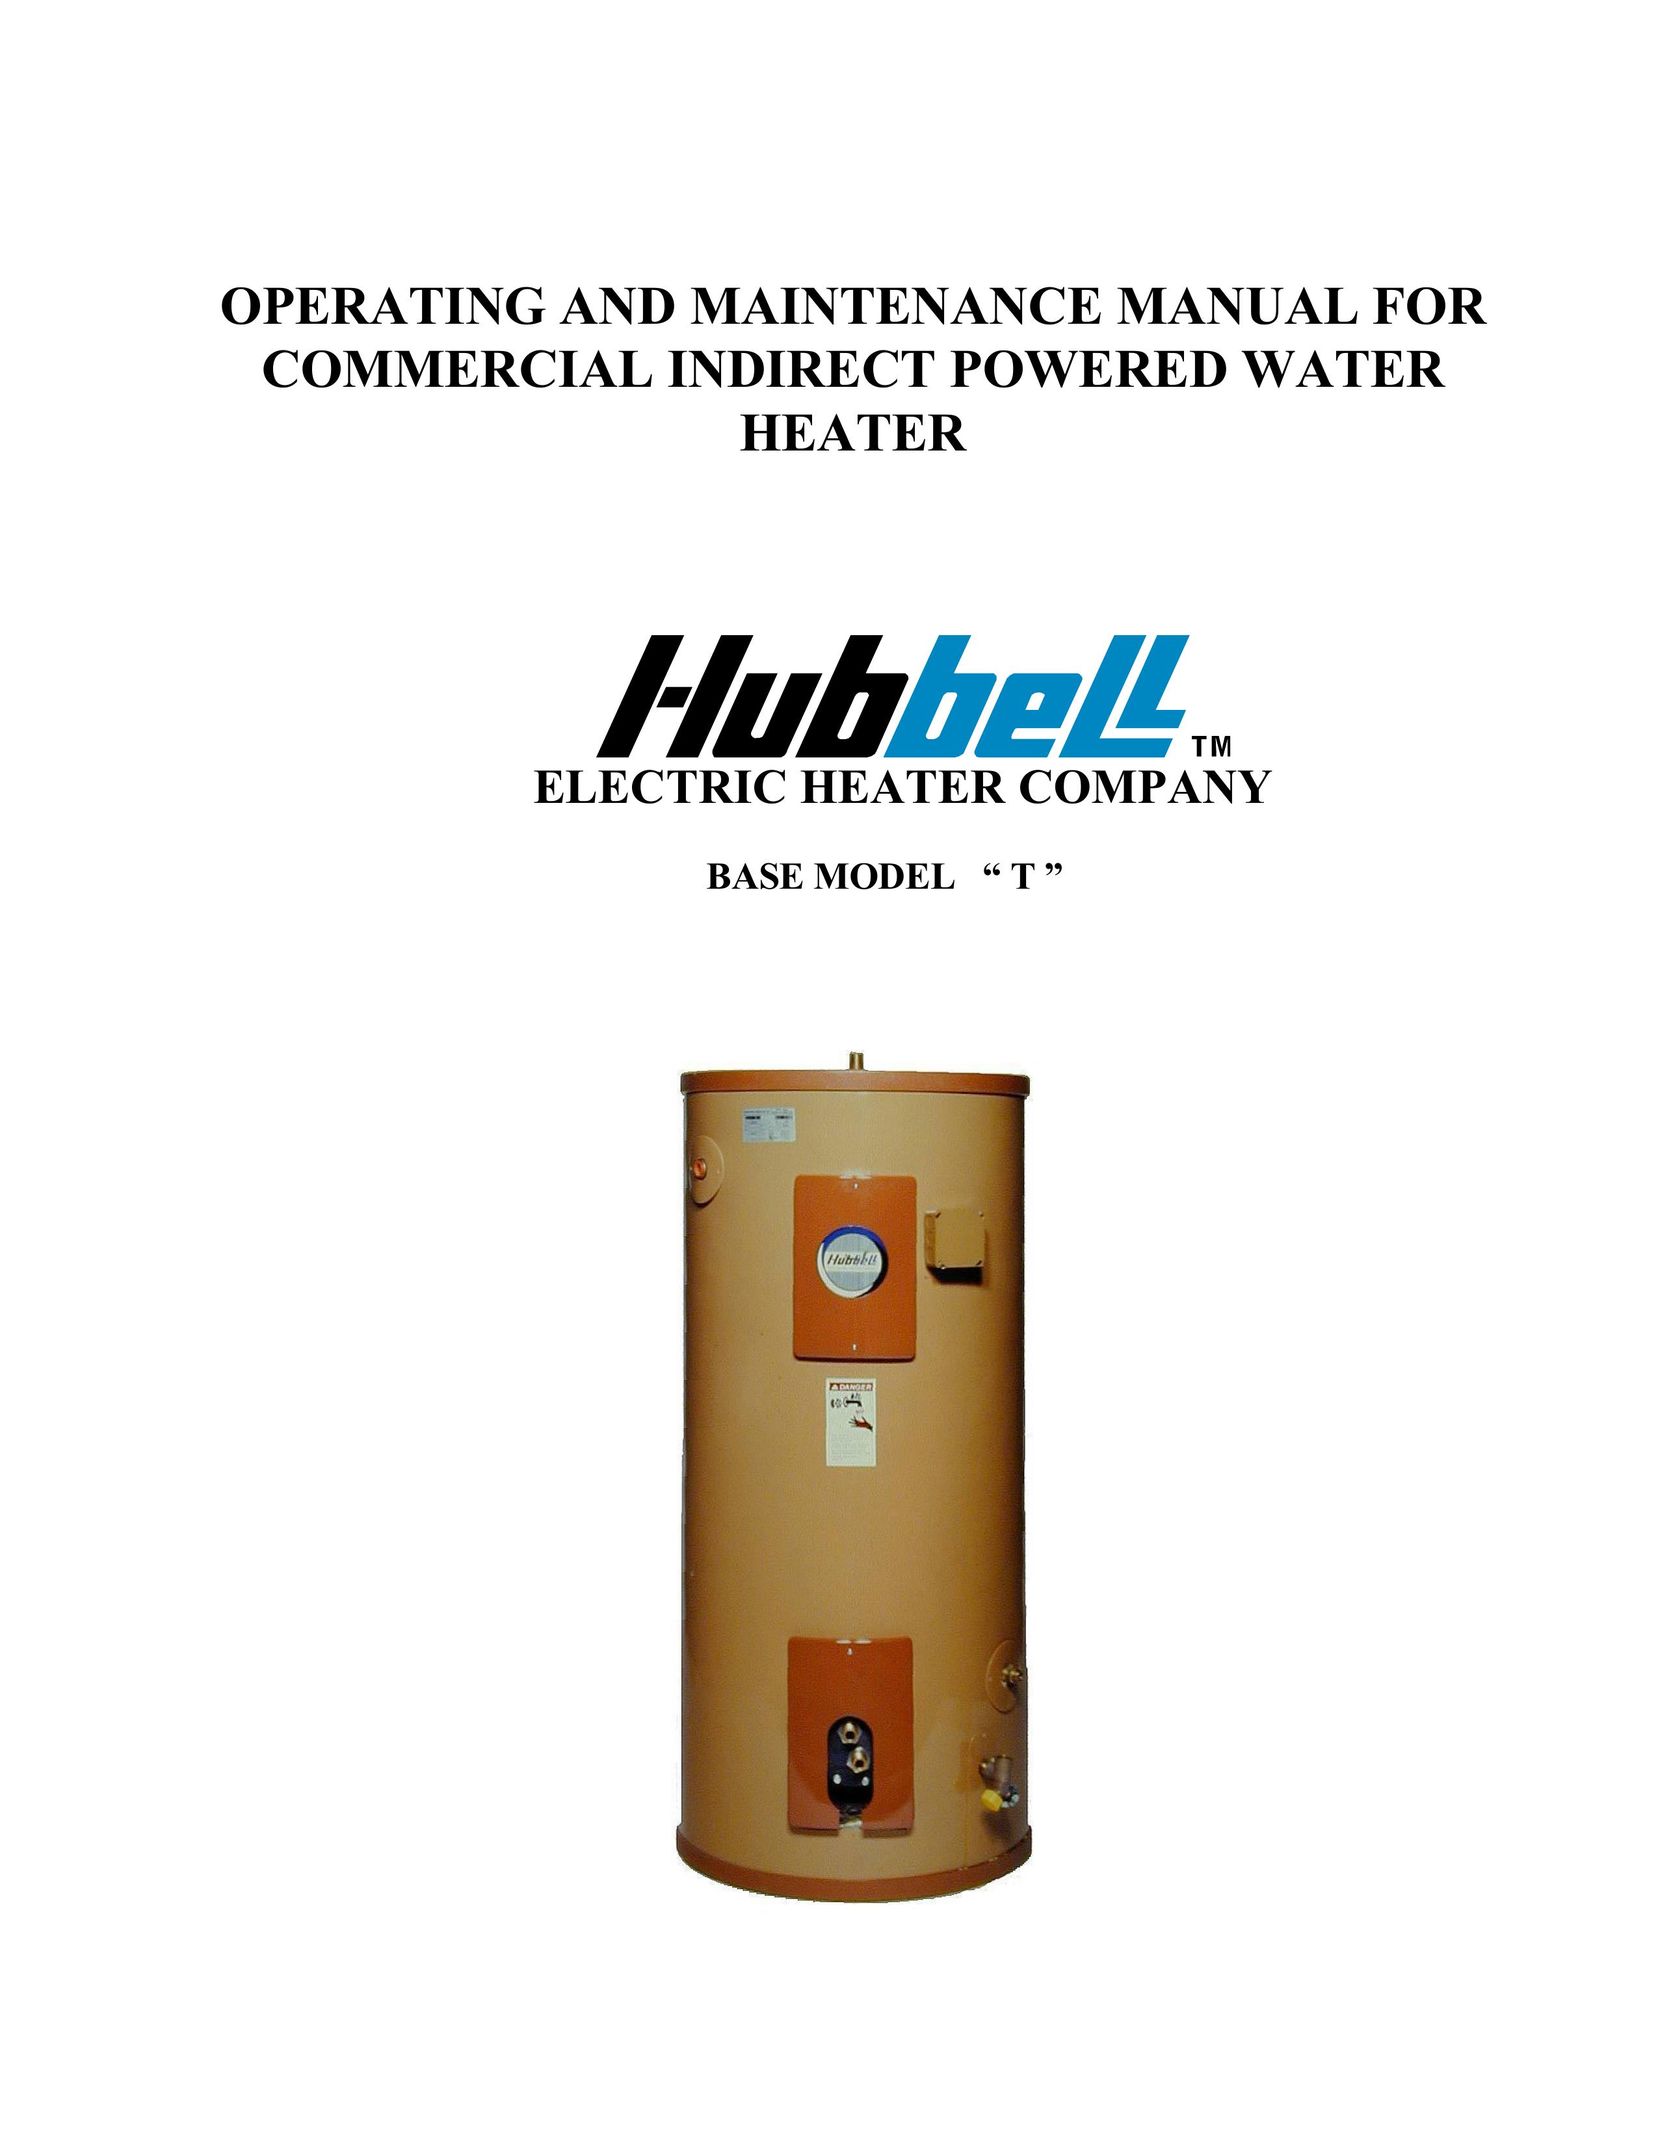 Hubbell Electric Heater Company T Water Heater User Manual